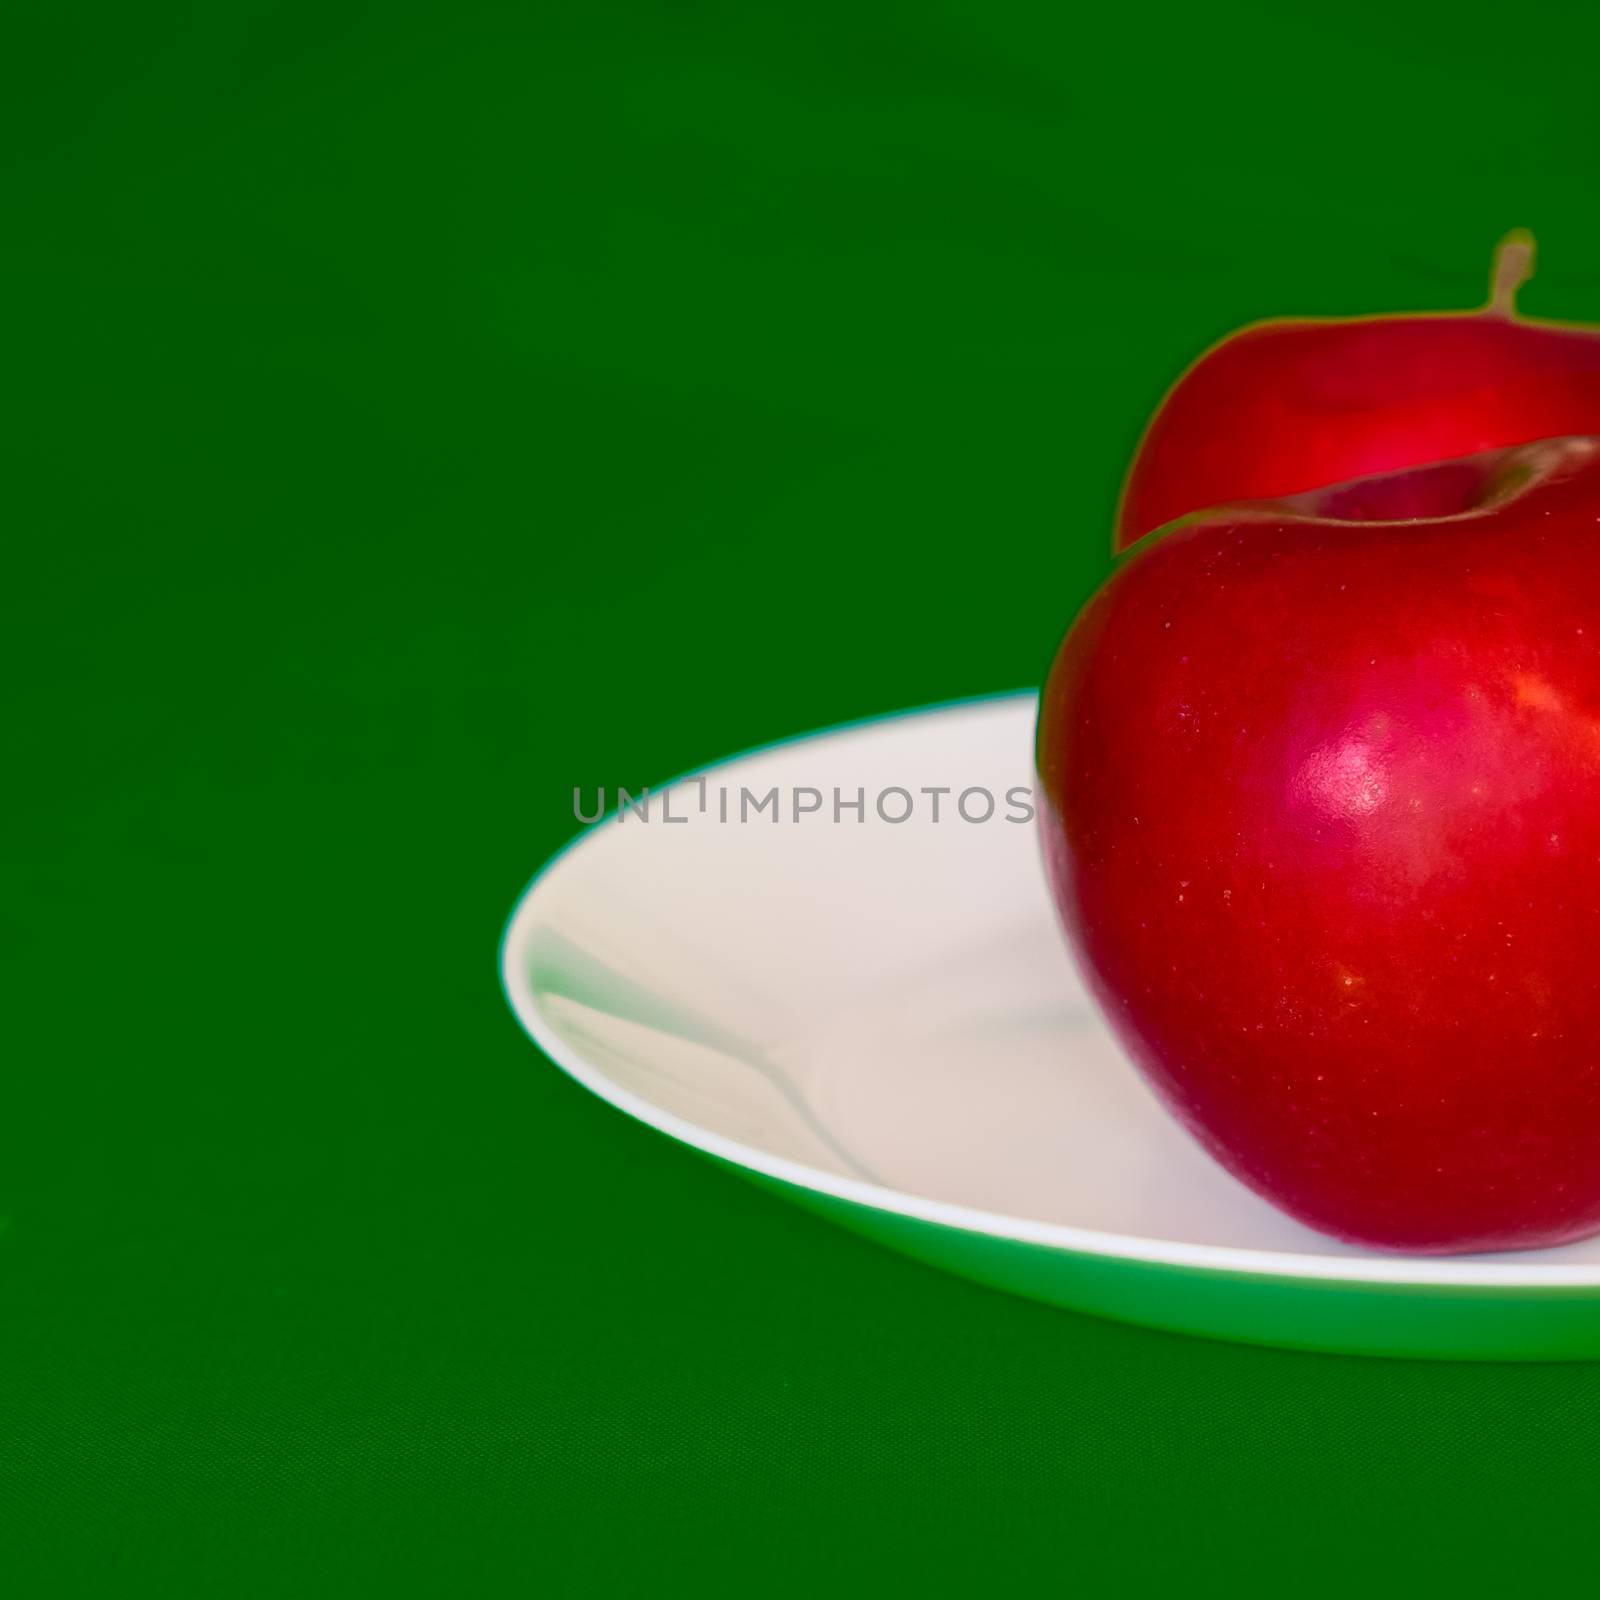 red apples on a white plate by alexandr_sorokin